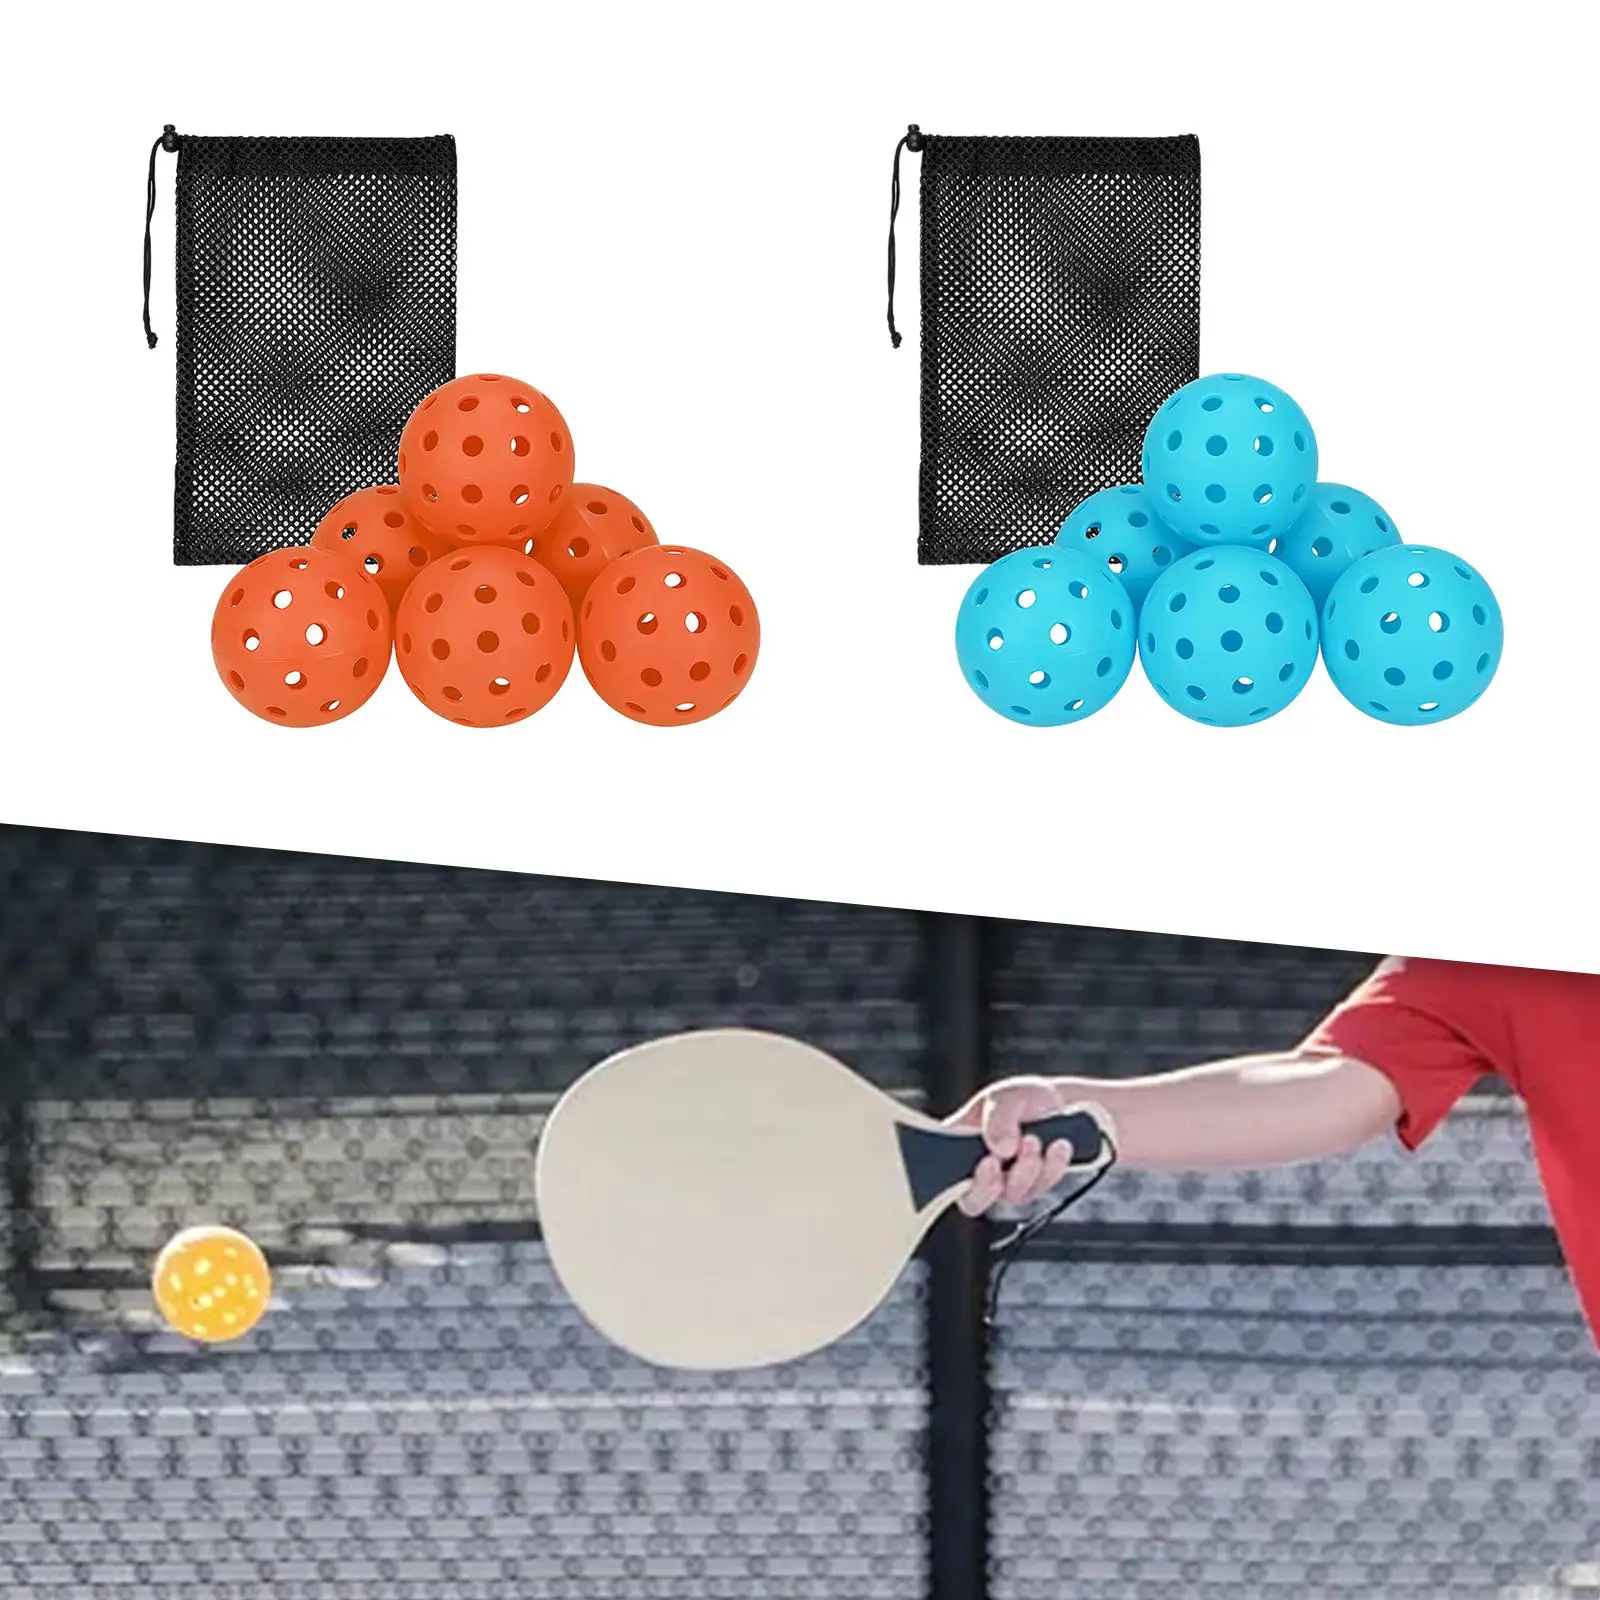 6pcs 40 Holes Pickleball Balls Official Size Pickleball Accessories Practice